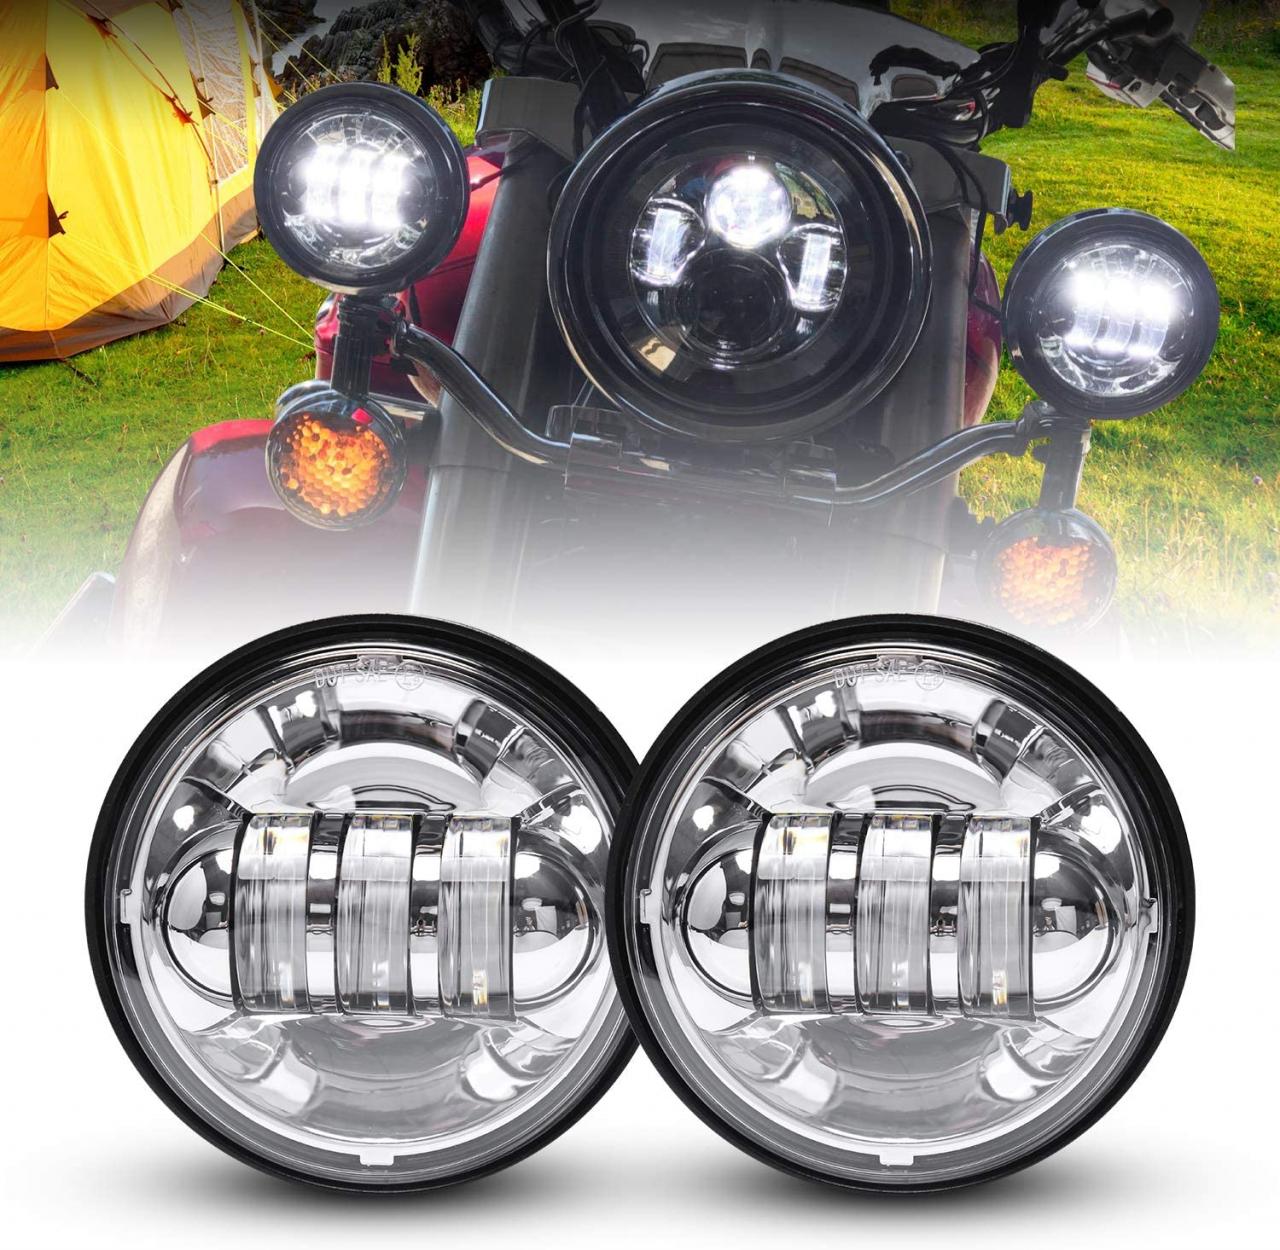 Buy Black 7 inch LED Headlight with 4.5 inch Matching Black Passing Fog  Lamps Compatible with Harley Motorcycles with Mounting Bracket and Wire  adapter Online in Hong Kong. B01B3778TO